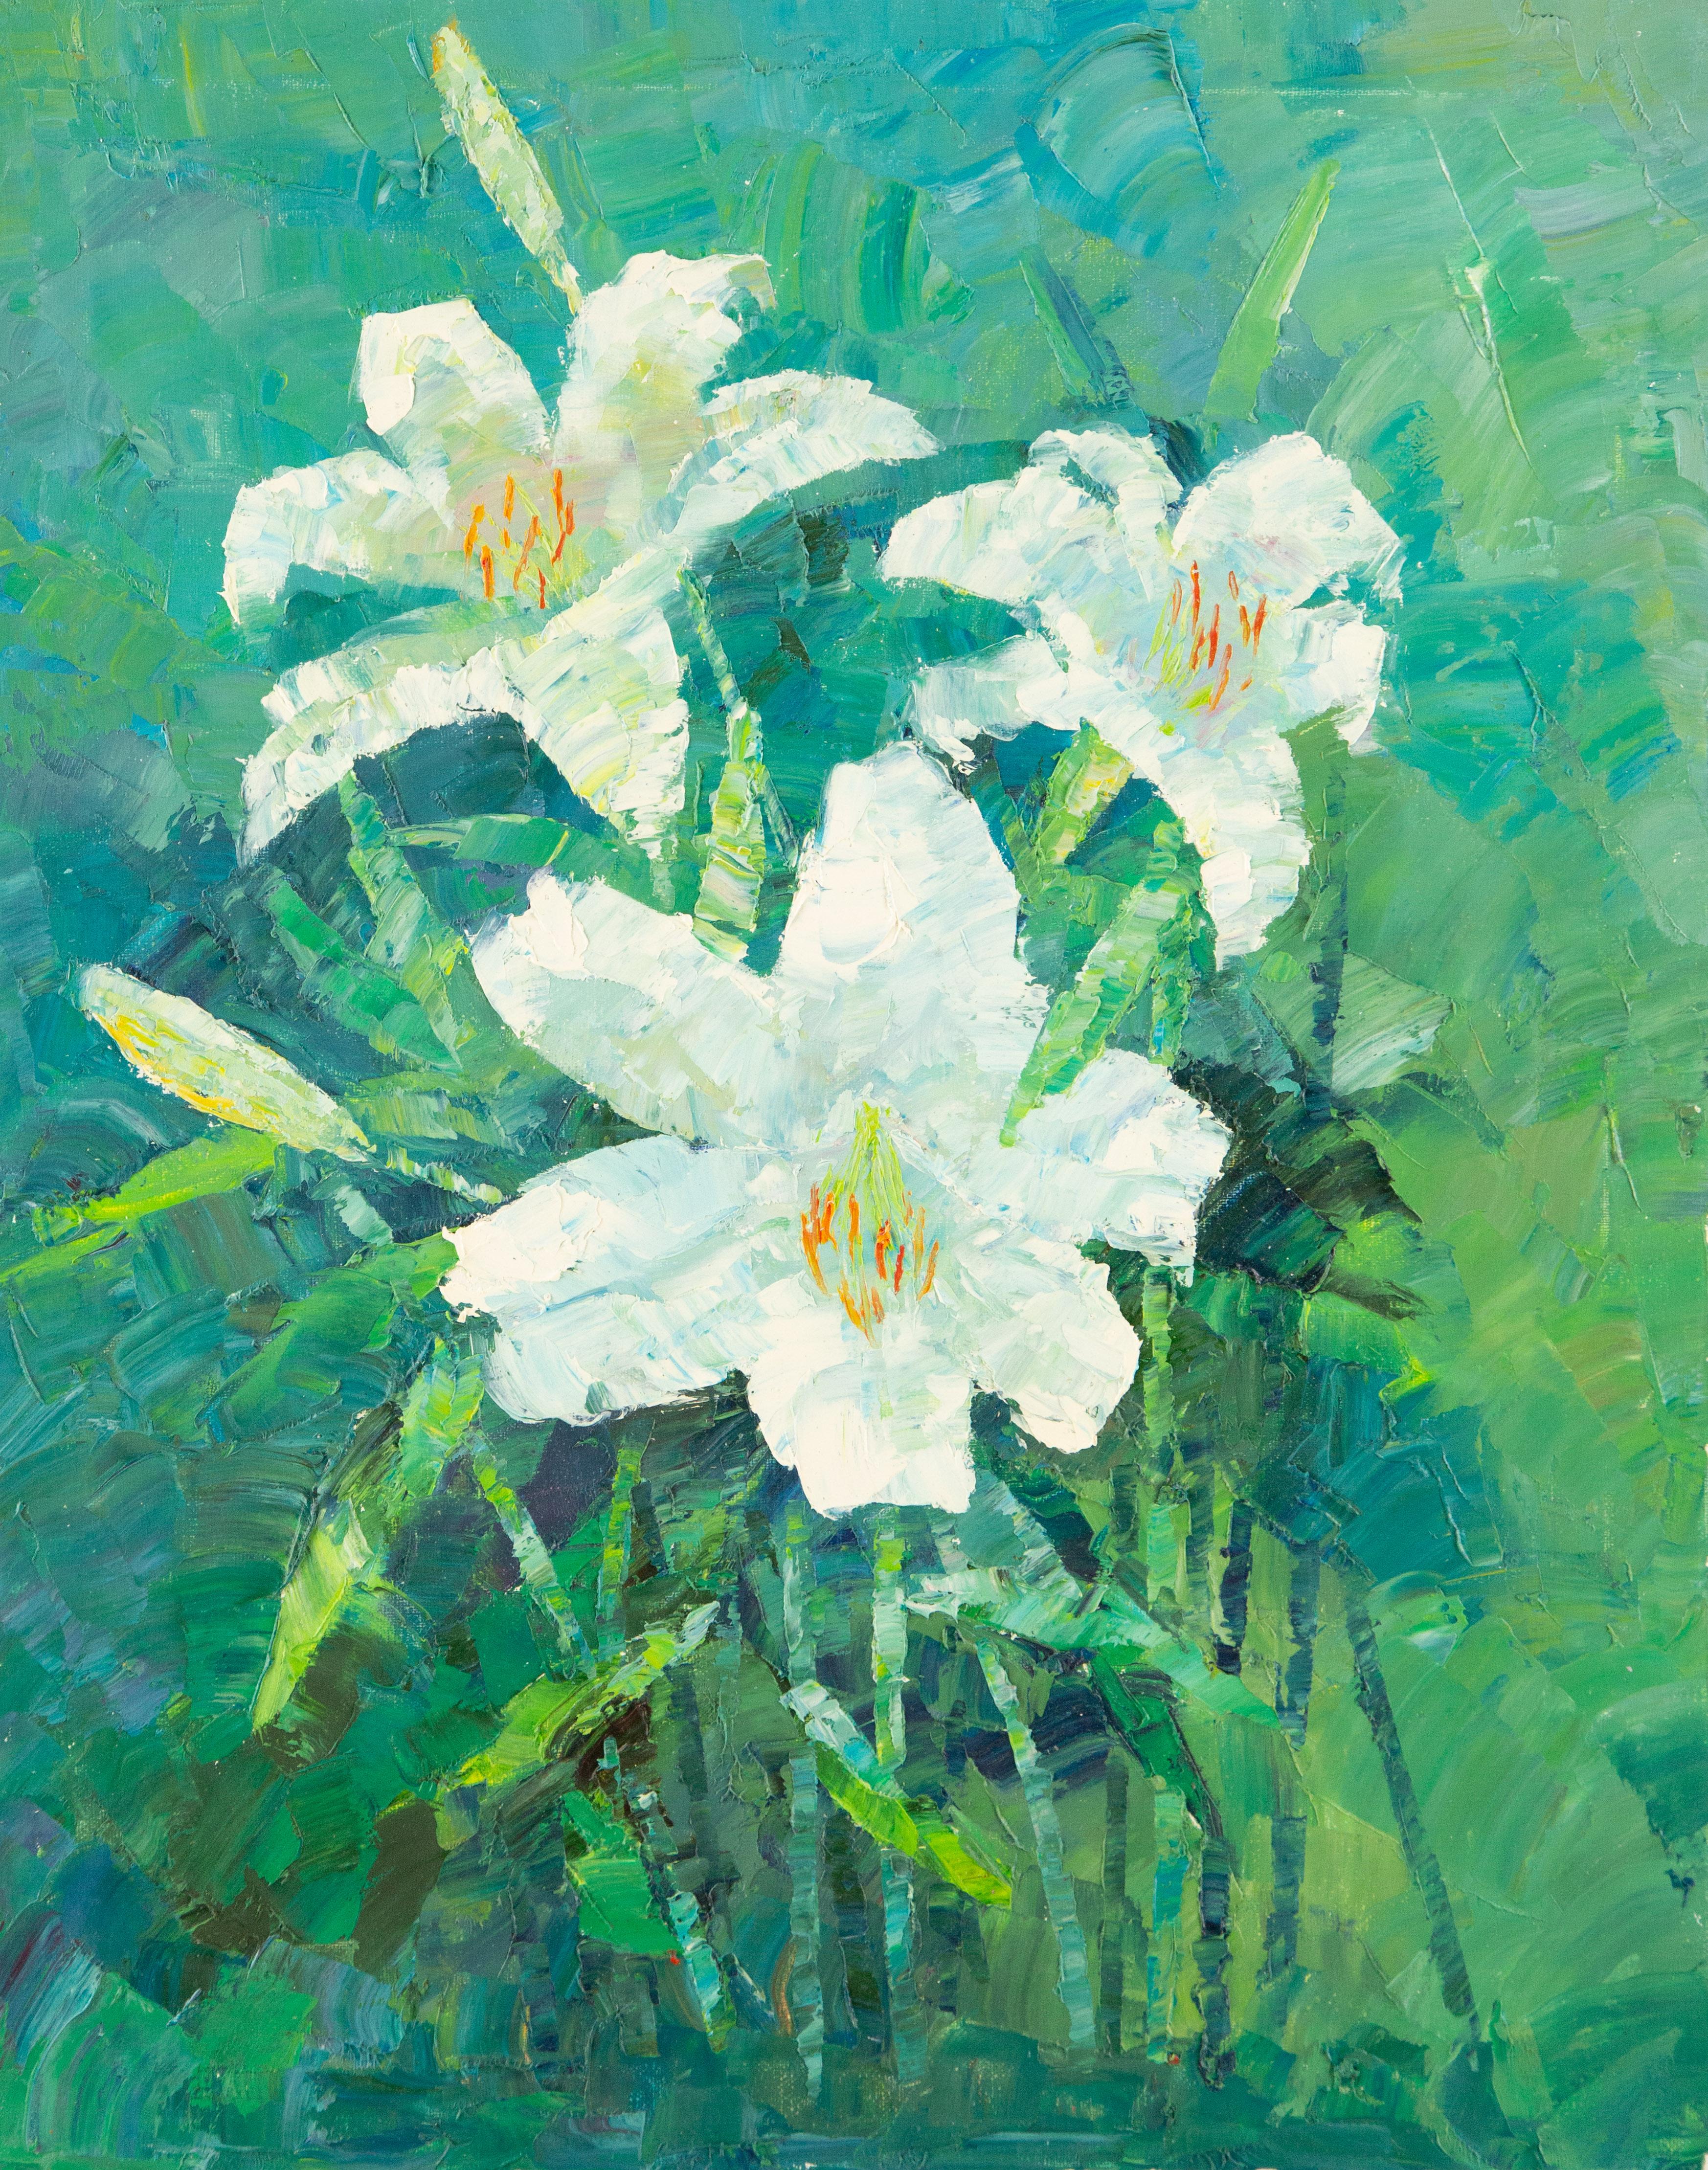  Title: White Lily
 Medium: Oil on canvas
 Size: 19.25 x 15.25 inches
 Frame: Framing options available!
 Condition: The painting appears to be in excellent condition.
 Note: This painting is unstretched
 Year: 2015
 Artist: Jiwei Chen
 Signature: